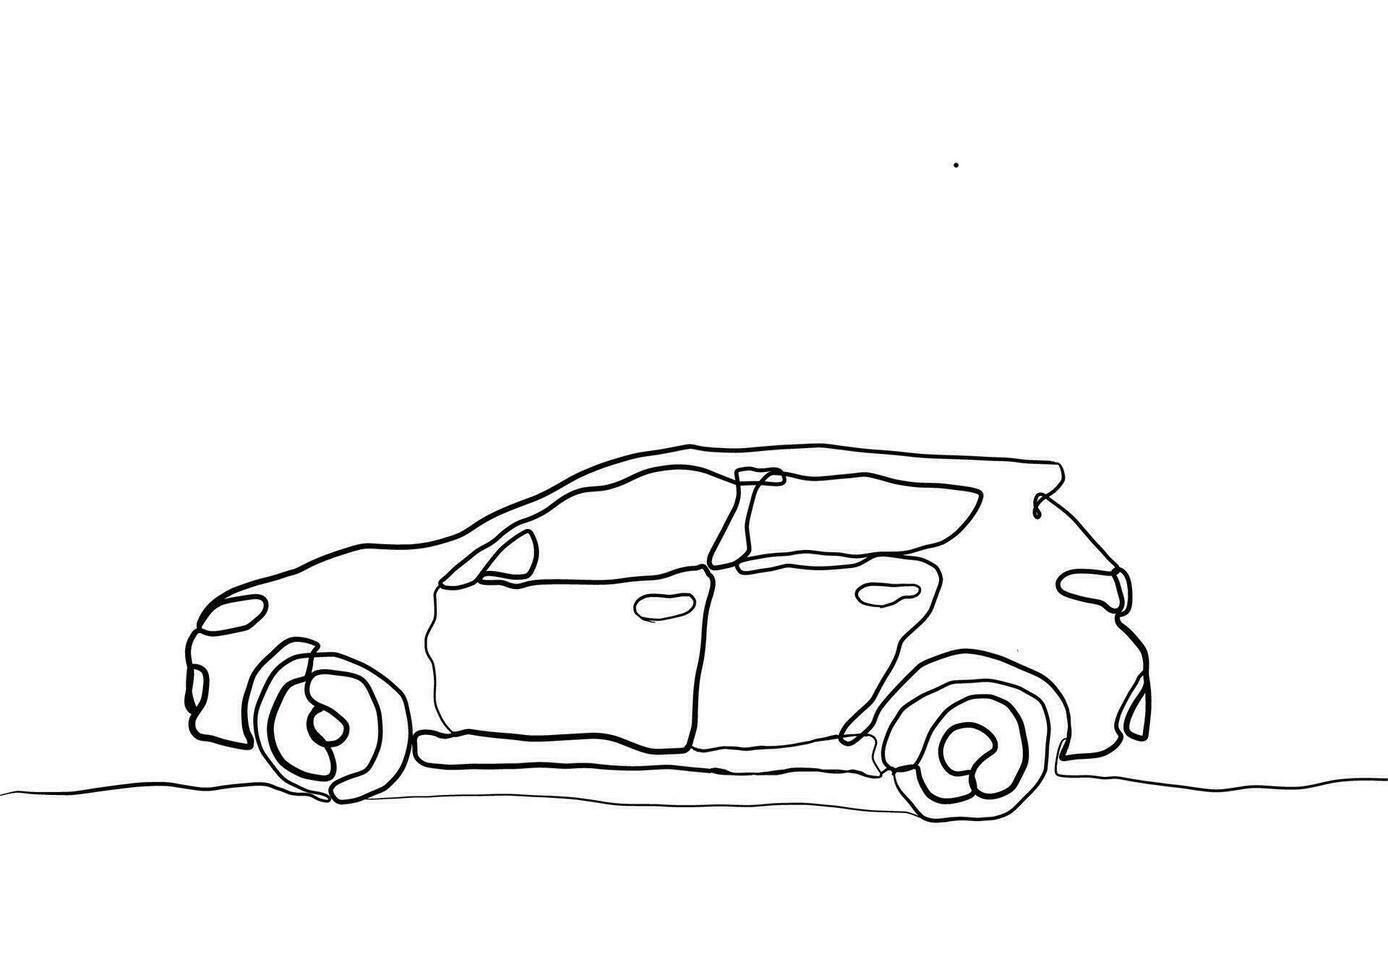 Continuous line drawing of car. Line,old car,continuous line ,drawing, Continuous,one line,drawing . vector